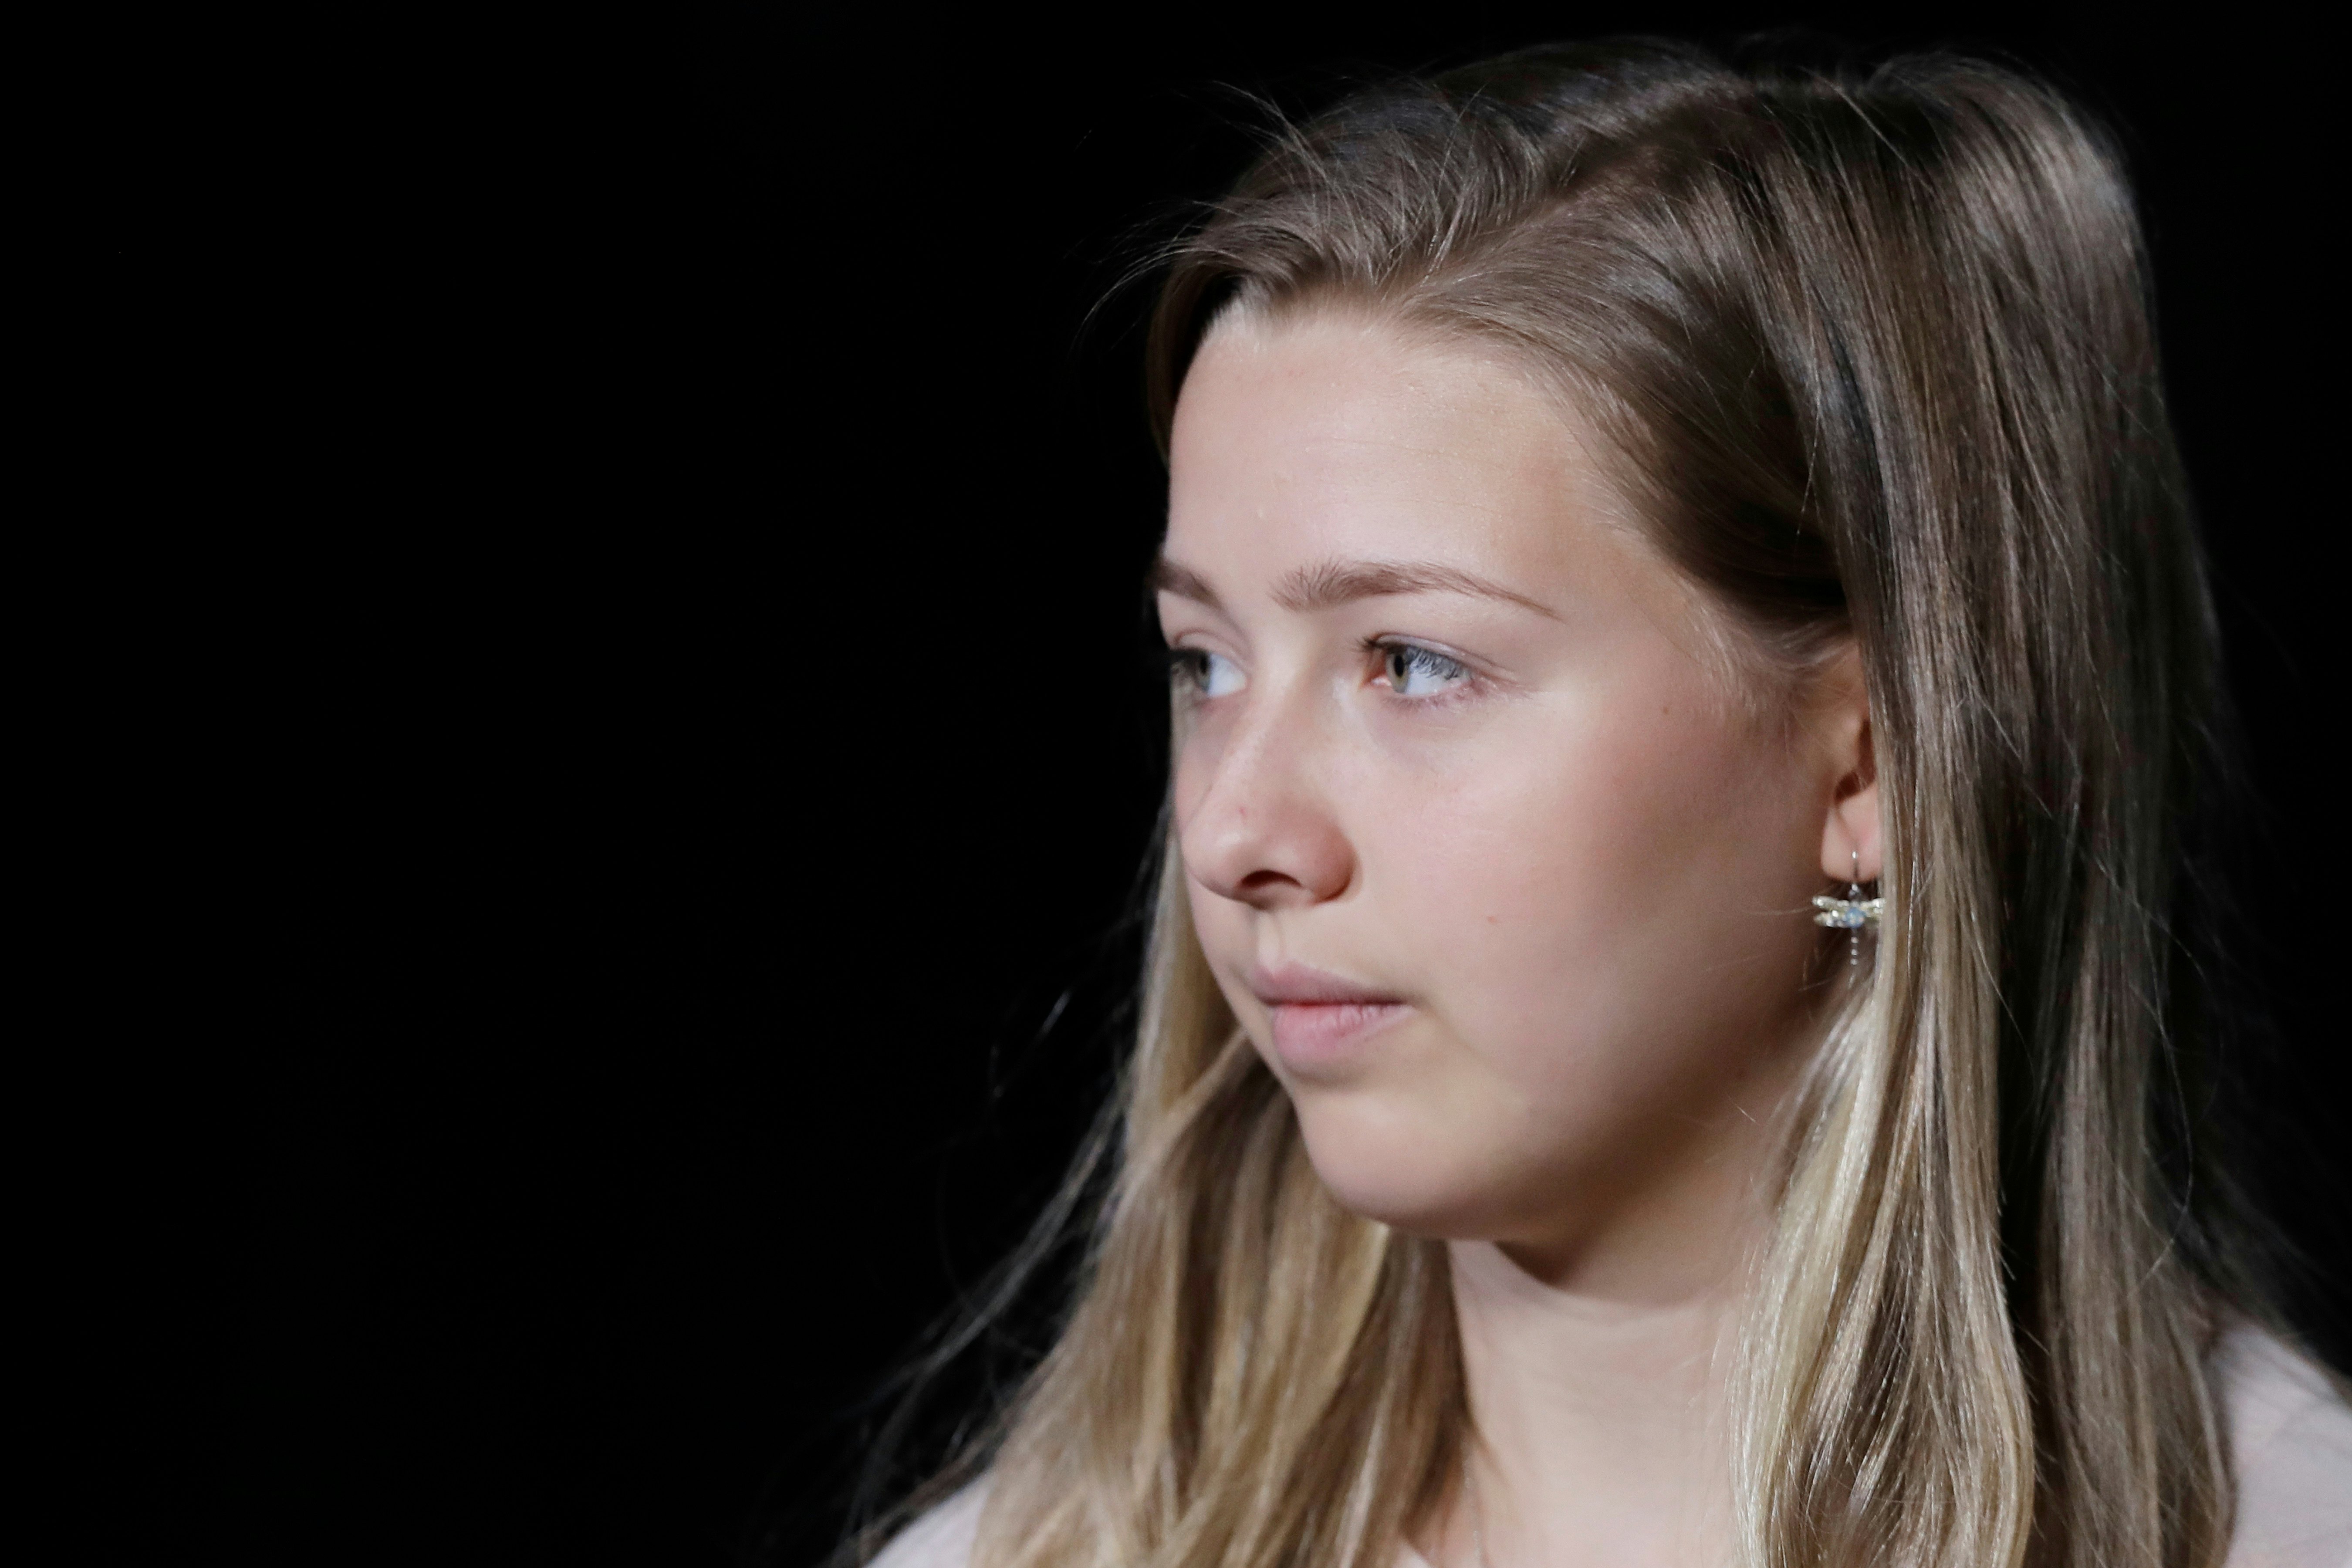 chessy prout cross examination